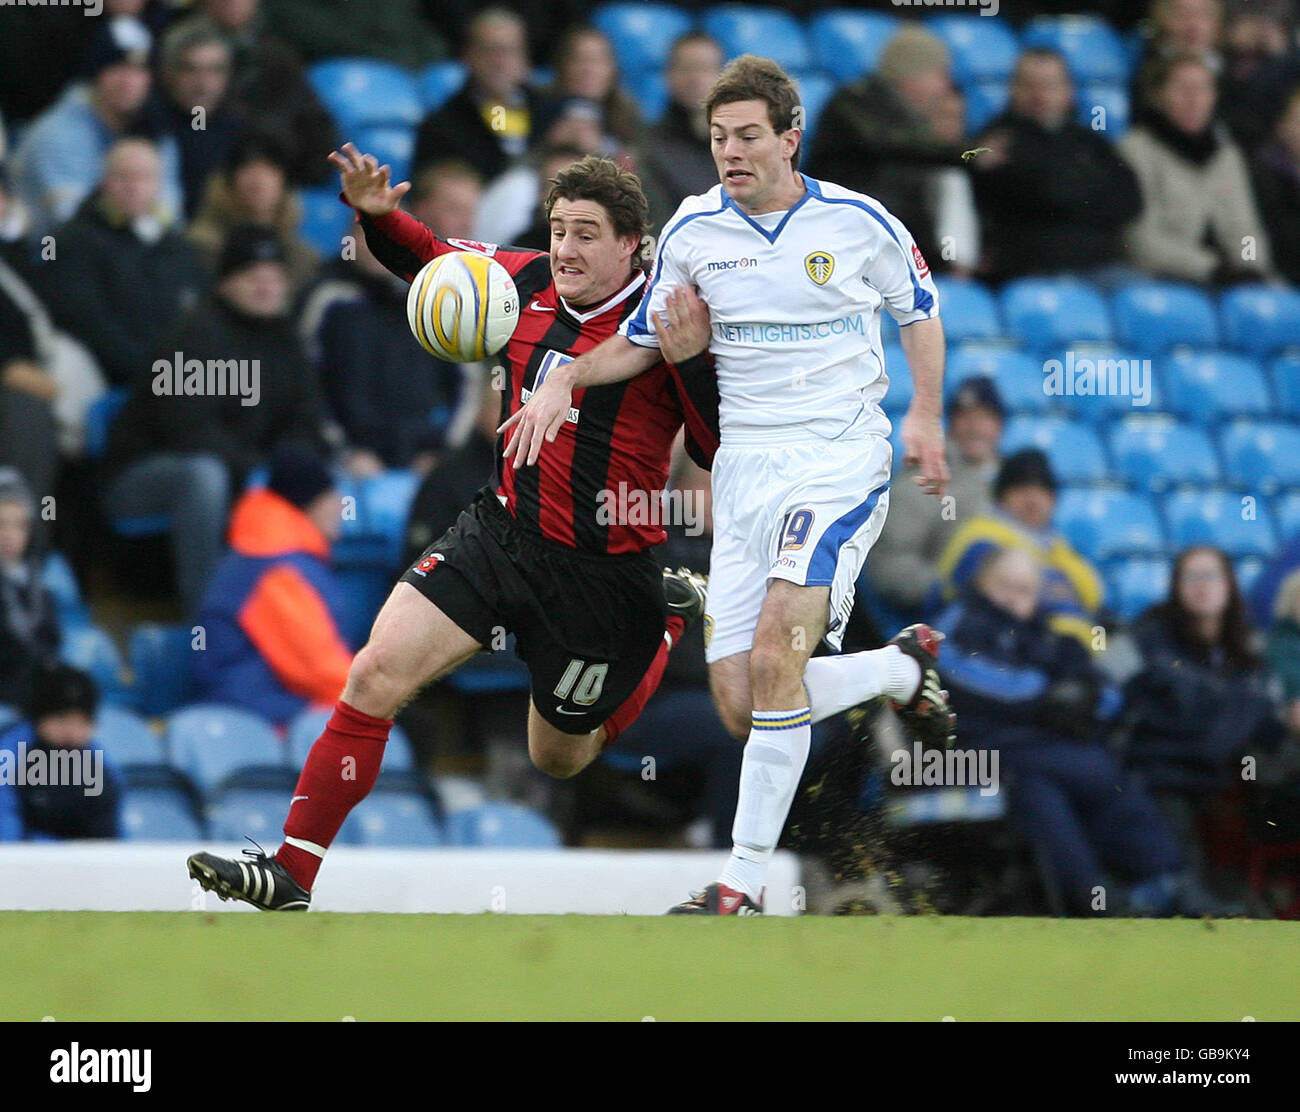 Leeds United's Ben Parker (right) and Hartlepool's Joel Porter during the Coca-Cola Football League One match at Elland Road, Leeds. Stock Photo